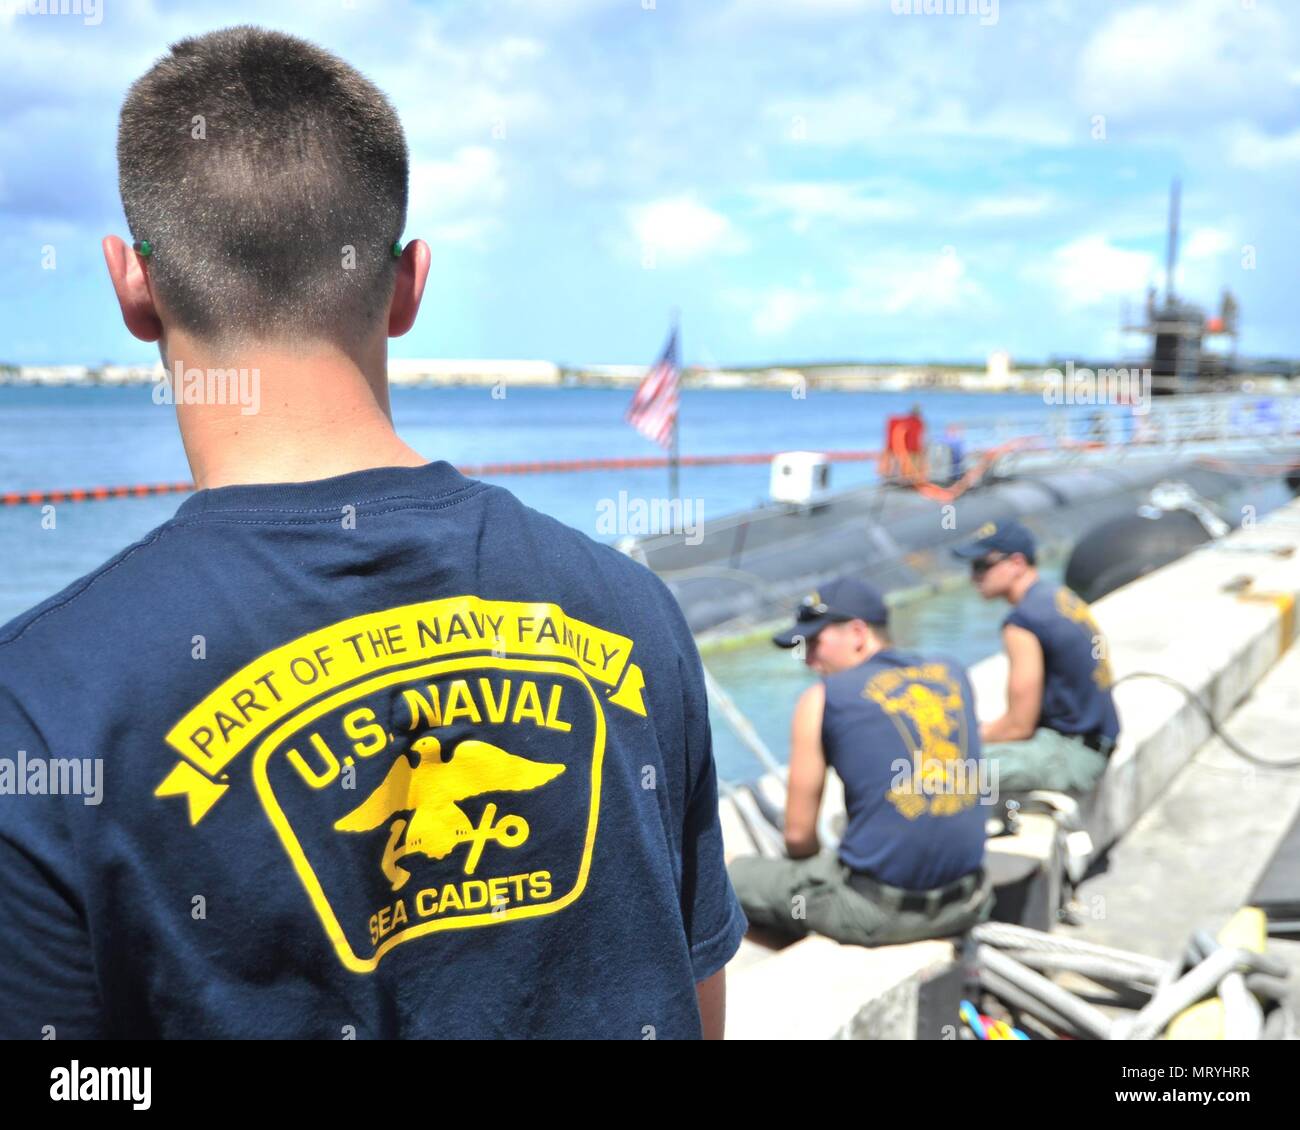 170714-N-YJ133-287 (POLARIS POINT, Guam) July 14, 2017 – A sea cadet from U.S. Naval Sea Cadet Corps Marianas Division Guam observes dive operations during a tour of submarine tender USS Emory S. Land (AS 39), July 14. Land and USS Frank Cable (AS 40), the U.S. Navy’s only two submarine tenders, both homeported in Apra Harbor, Guam, provide maintenance, hotel services and logistical support to submarines and surface ships in the U.S. 5th and 7th Fleet areas of operation. (U.S. Navy photo by Mass Communication Specialist 2nd Class Richard A. Miller/RELEASED) Stock Photo